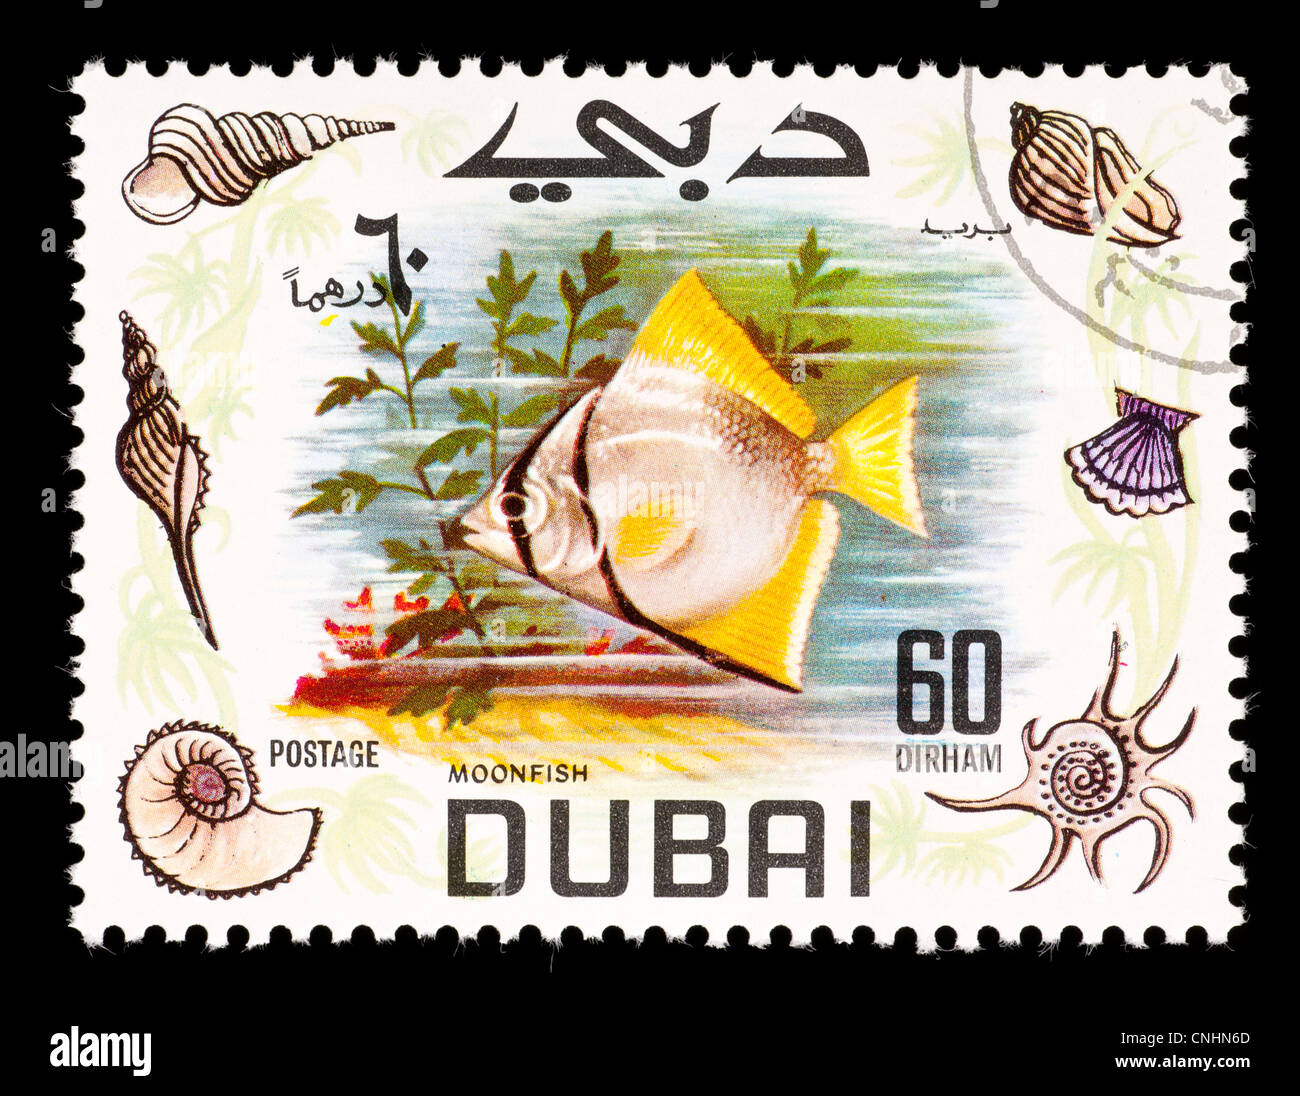 Postage stamp from Dubai depicting a moonfish. Stock Photo